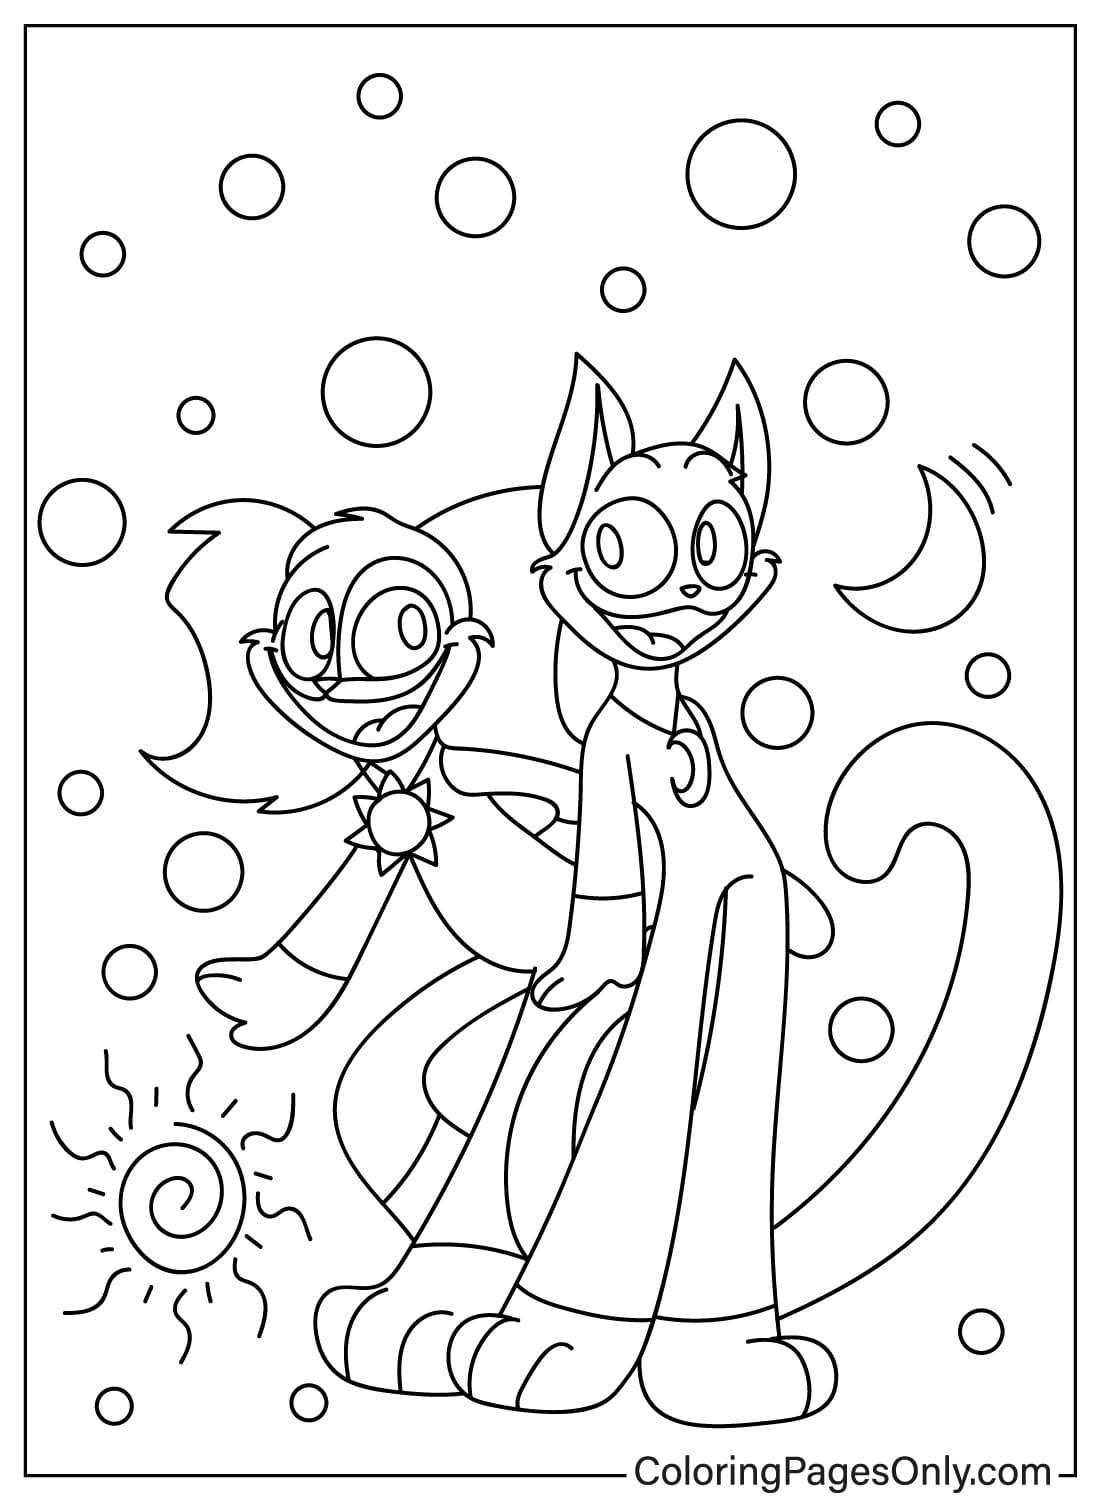 DogDay and CatNap Coloring Page Printable from CatNap